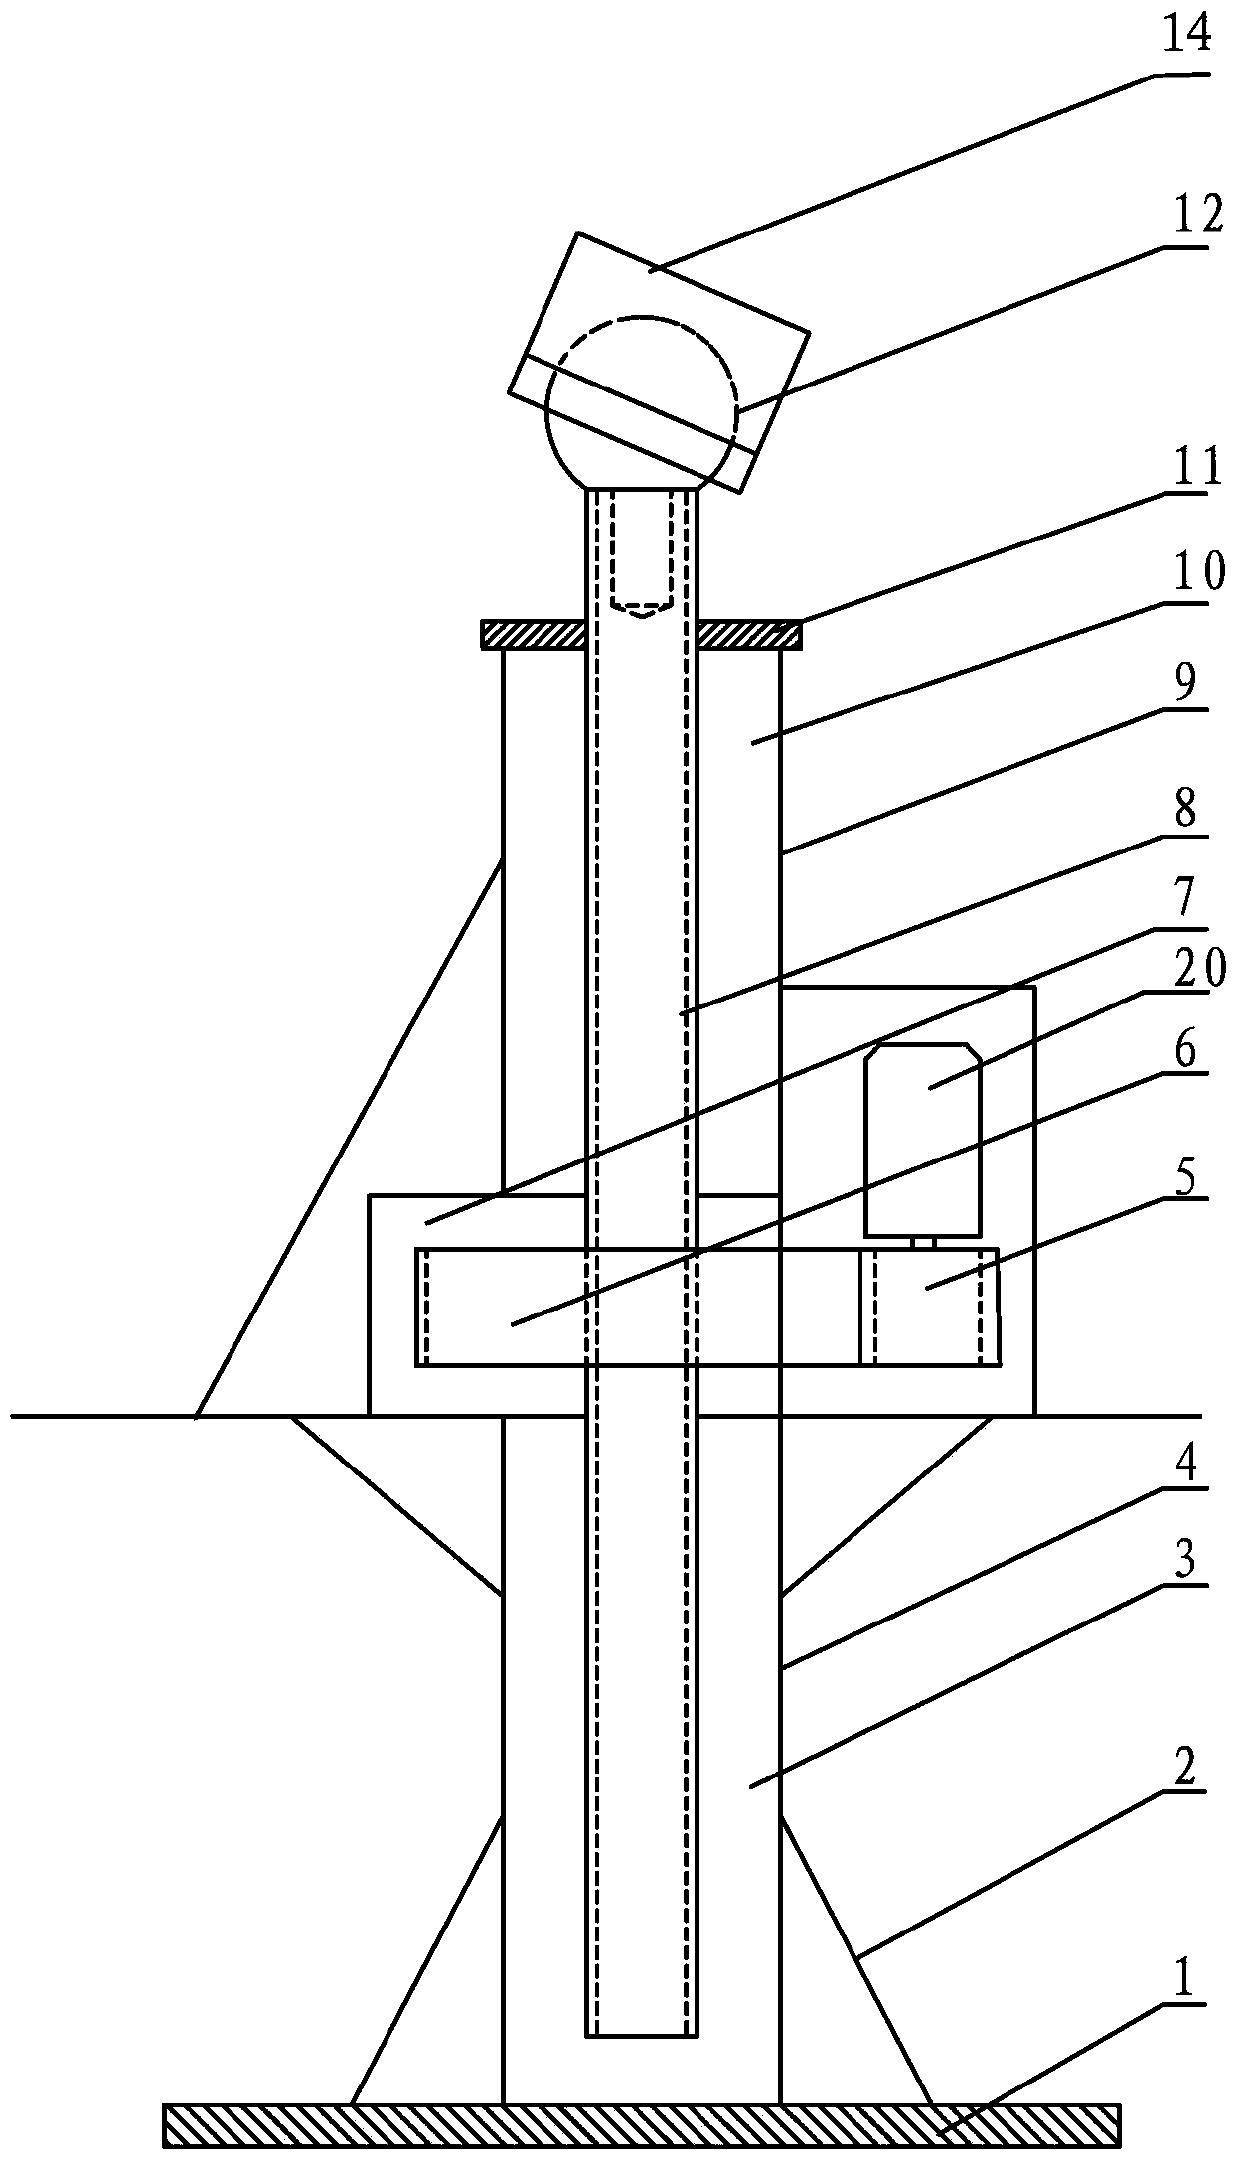 Controlling method of numerical control jig frame for ship building